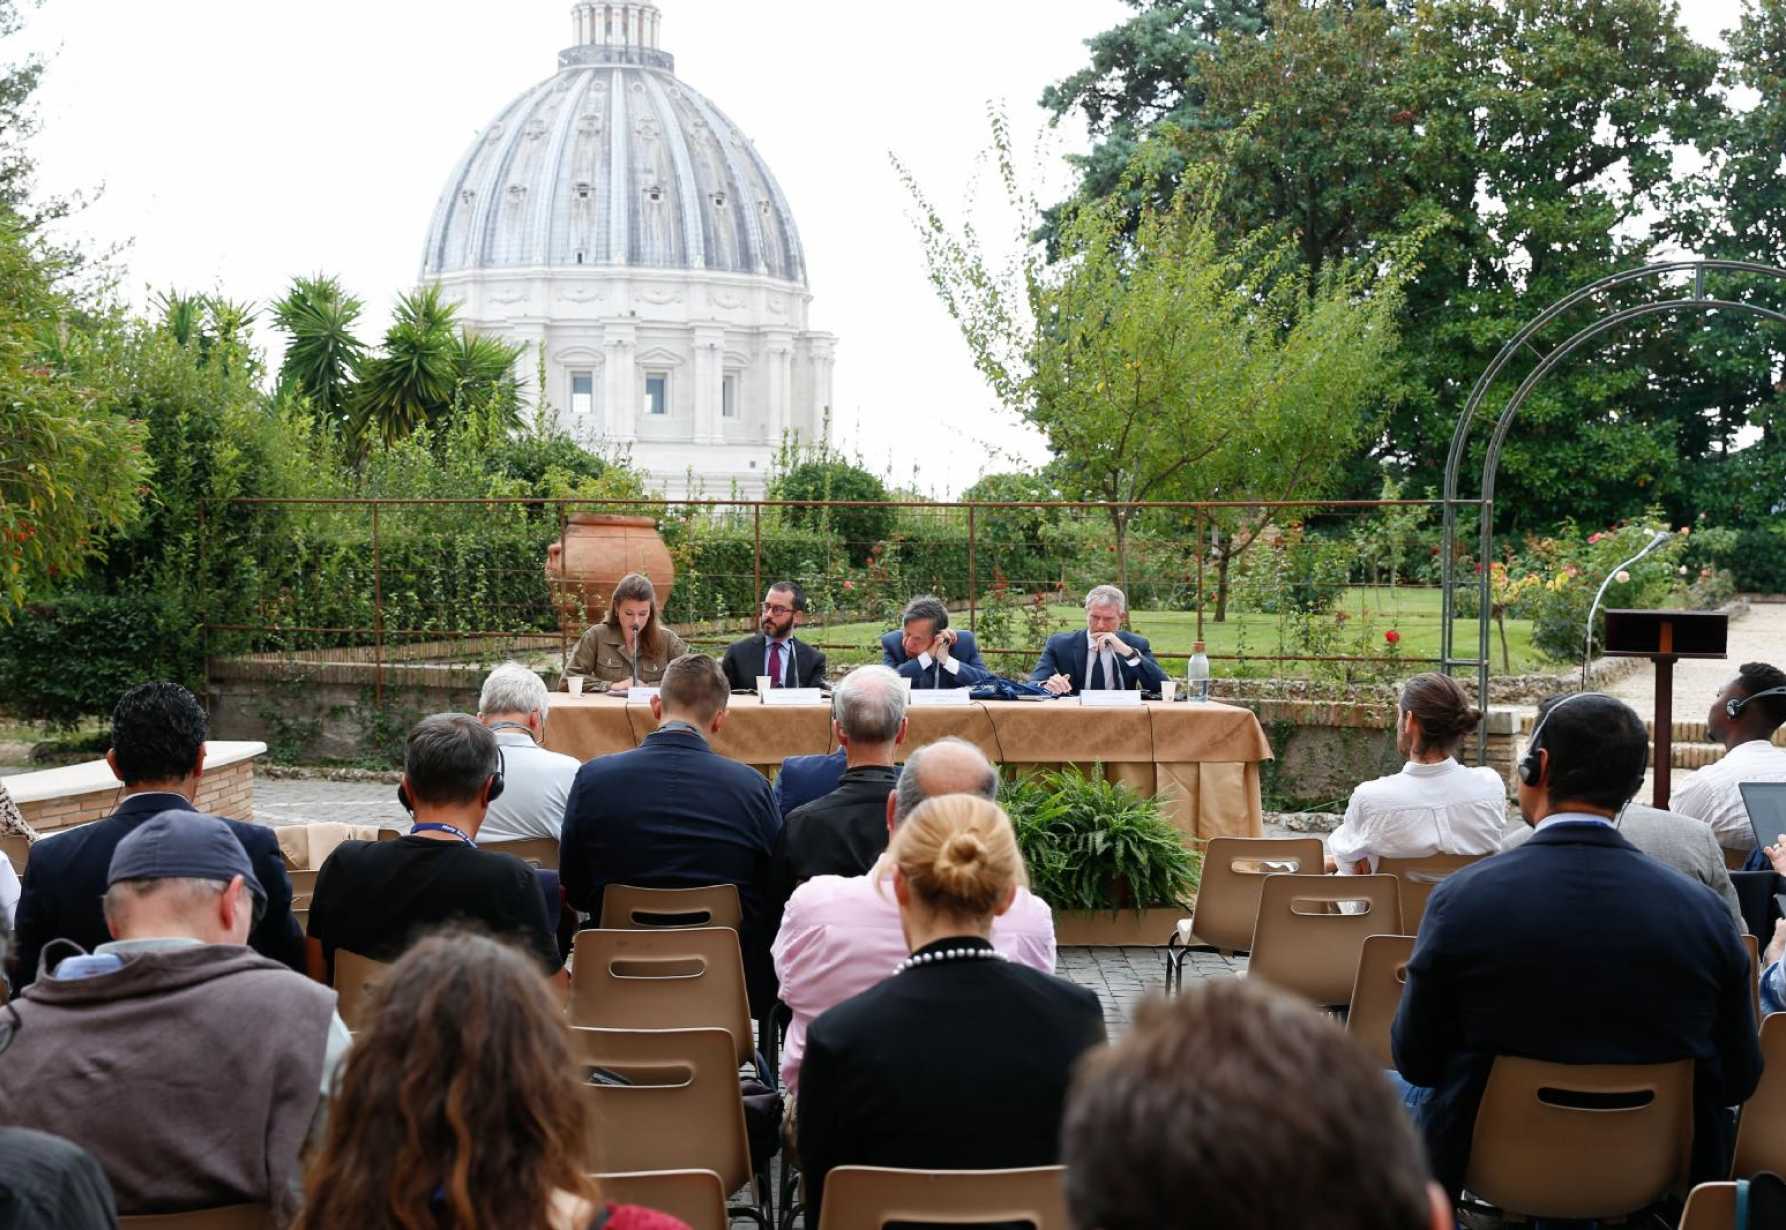 'People of goodwill' at Vatican event respond to 'Laudate Deum'